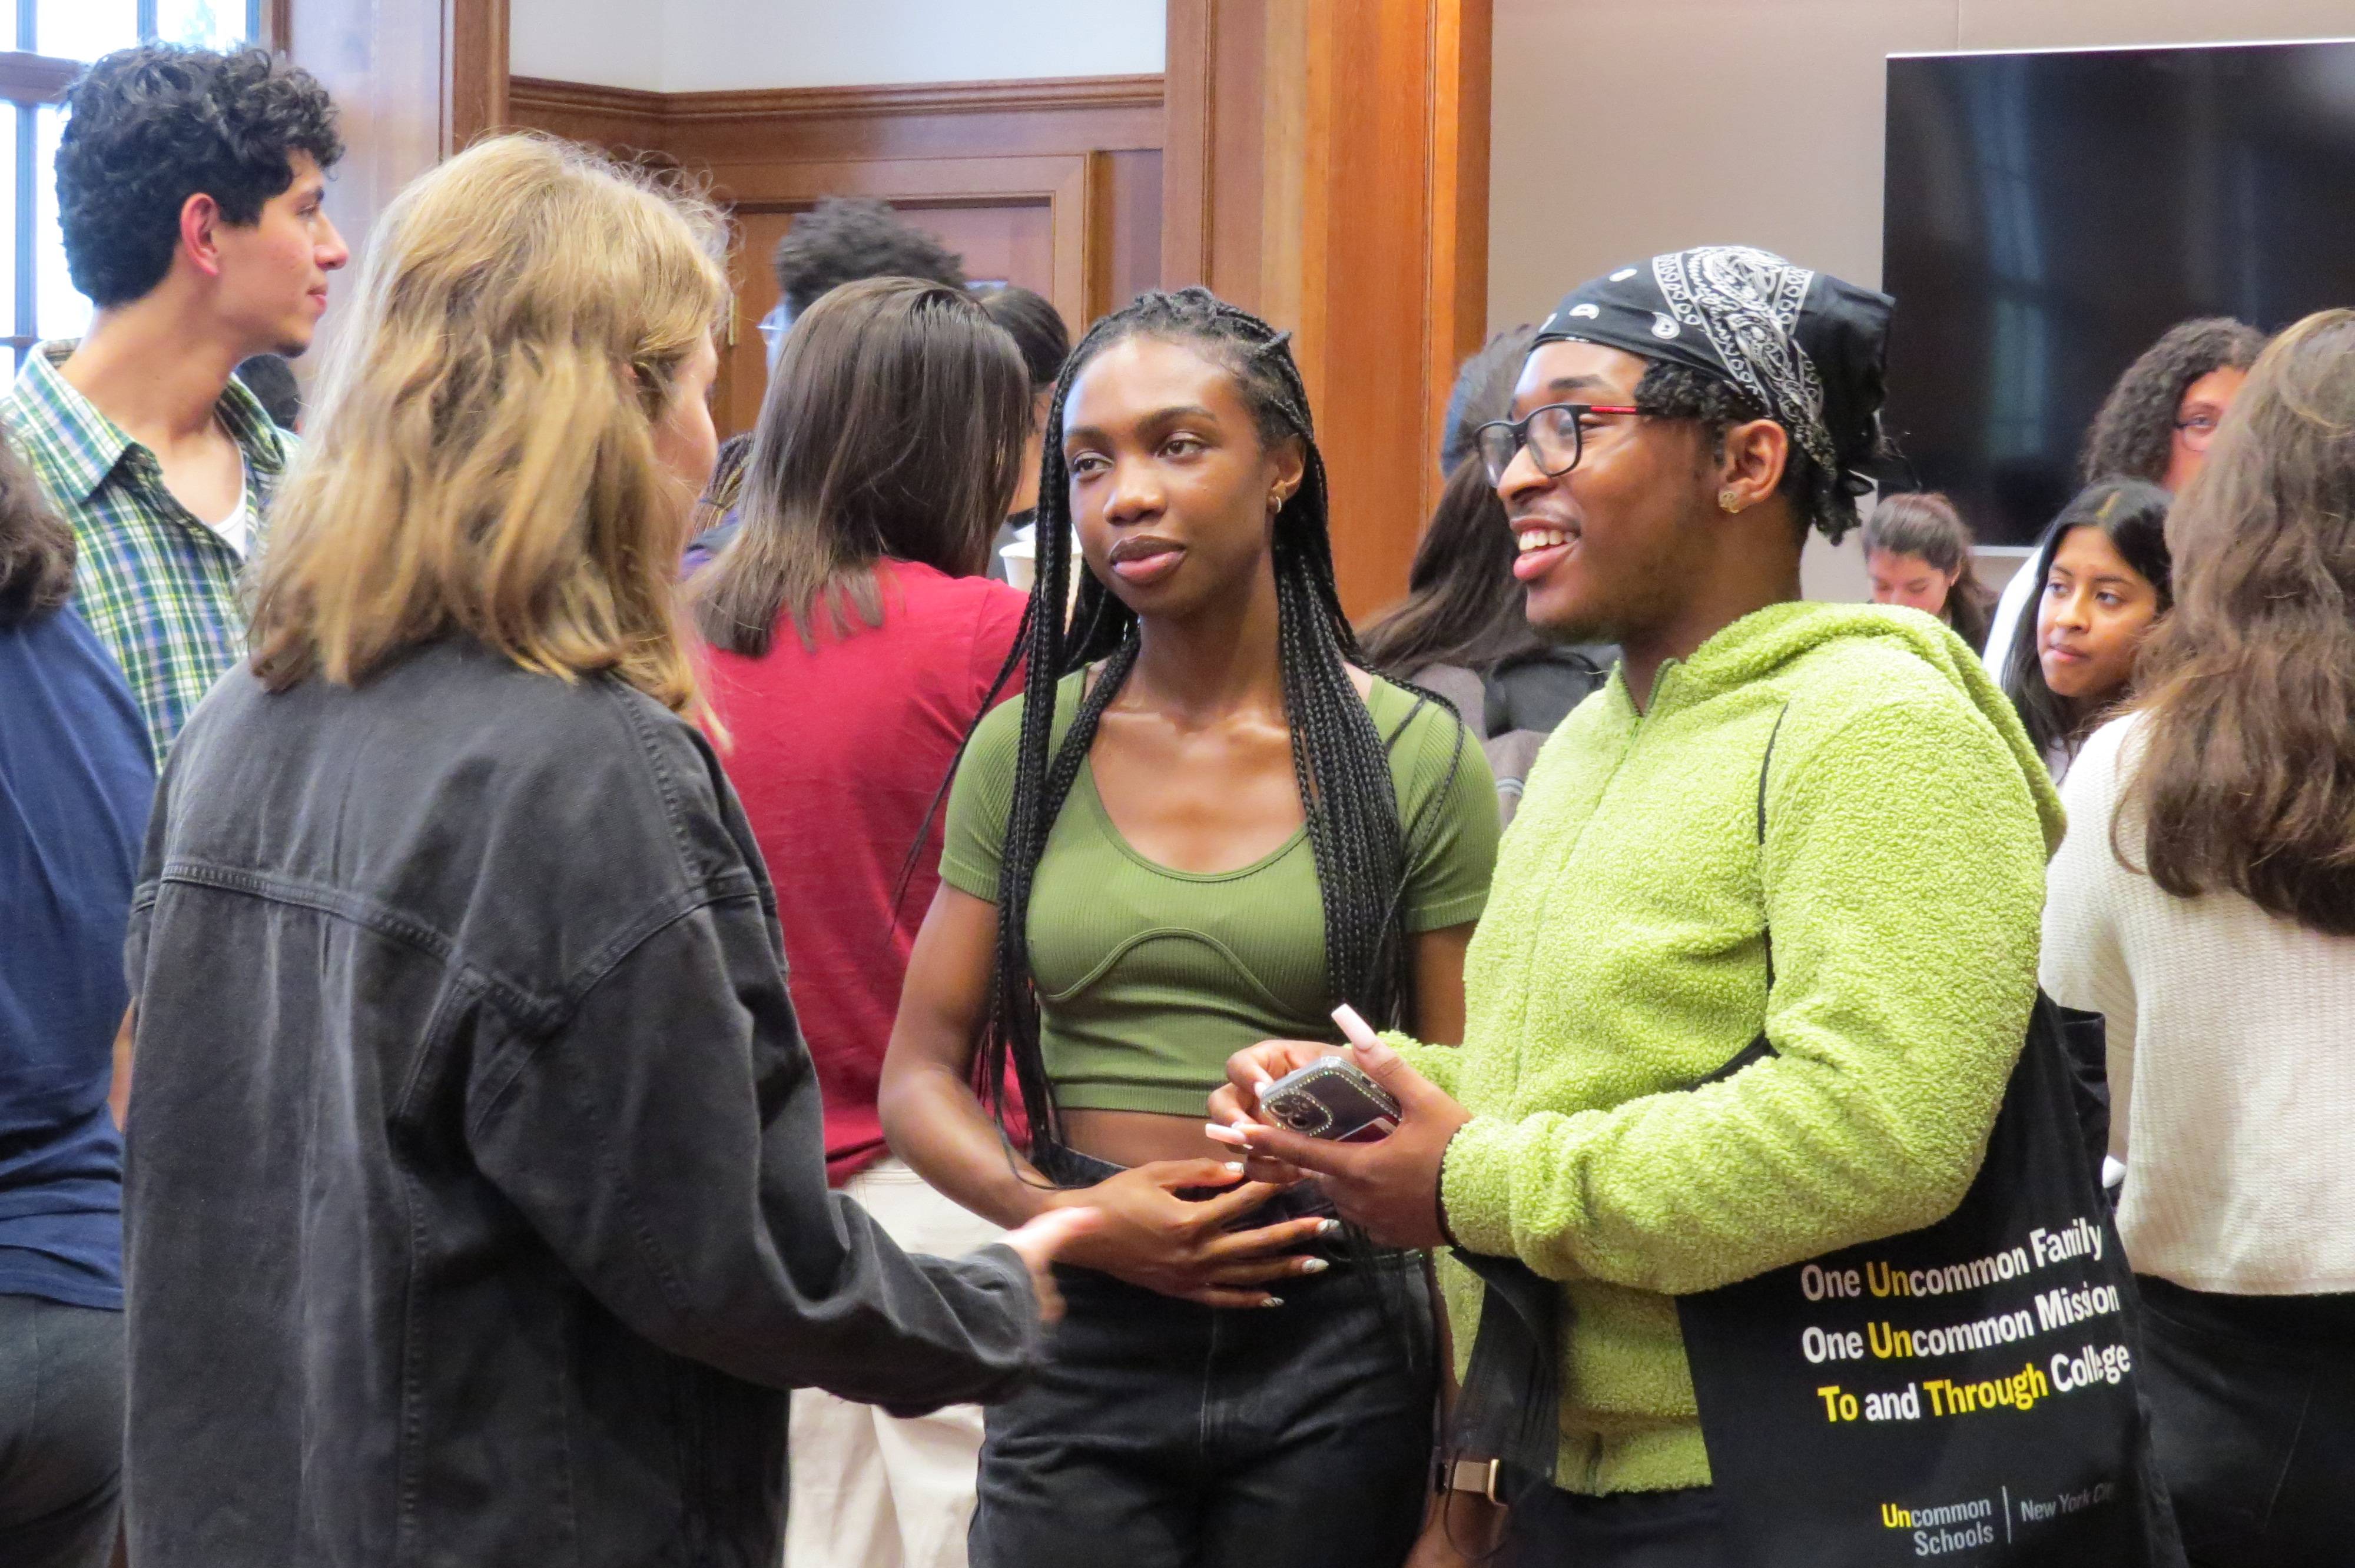 Students talk during fall 2022 mixer event